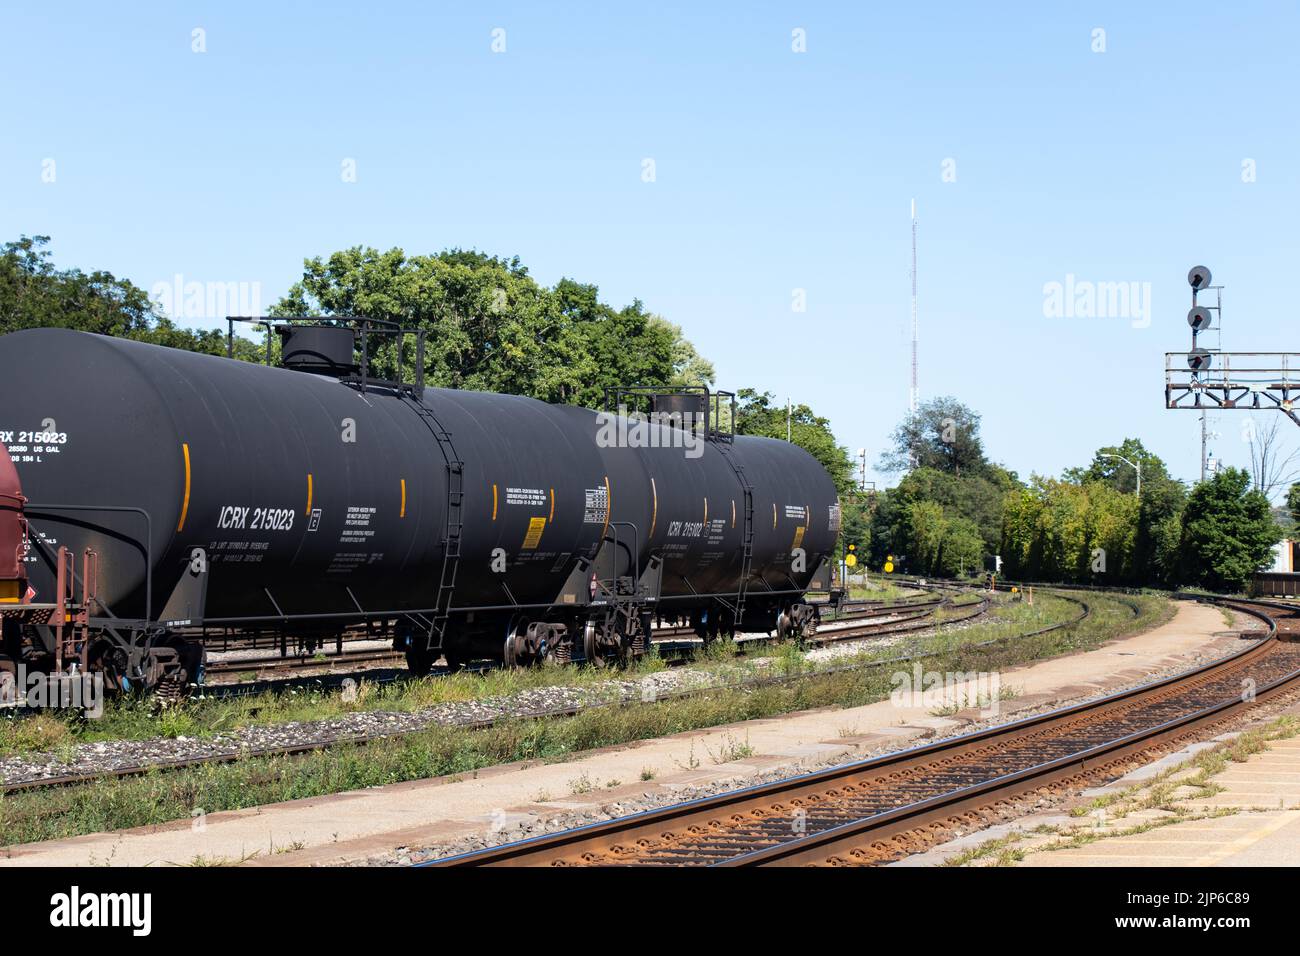 Three oil tanker freight train cars are seen together, stationary in a rail yard during the day. Stock Photo